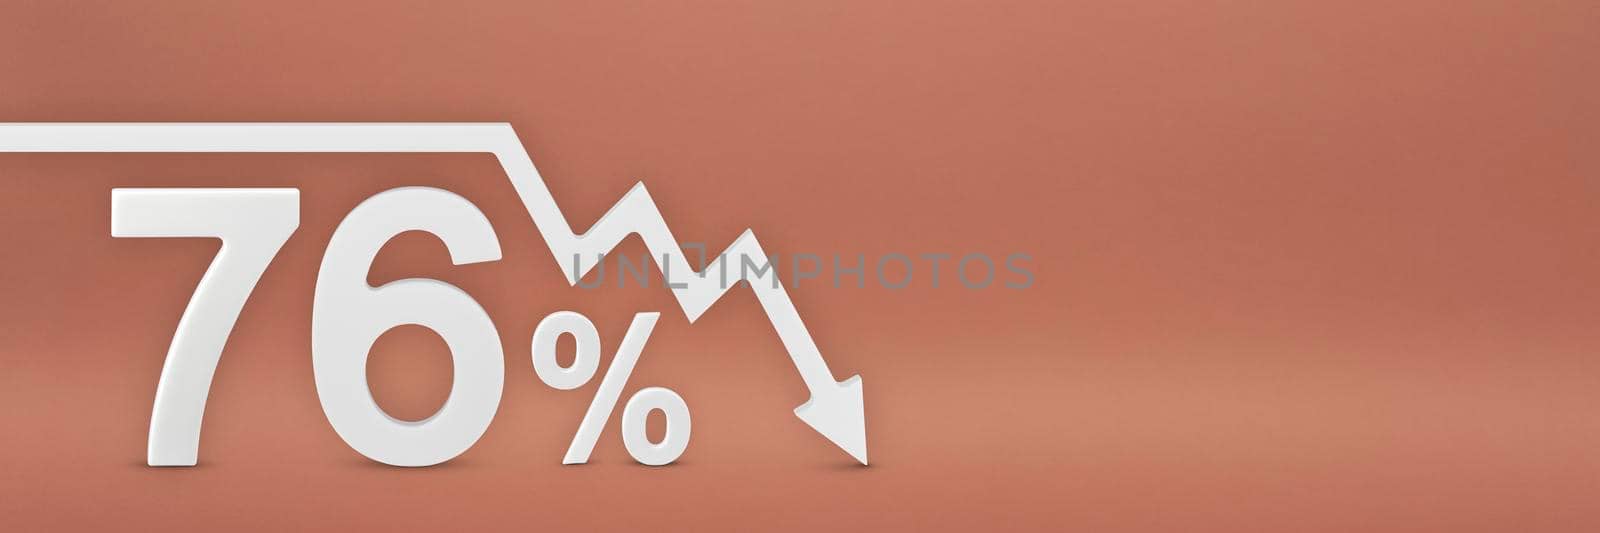 seventy-six percent, the arrow on the graph is pointing down. Stock market crash, bear market, inflation.Economic collapse, collapse of stocks.3d banner,76 percent discount sign on a red background. by SERSOL